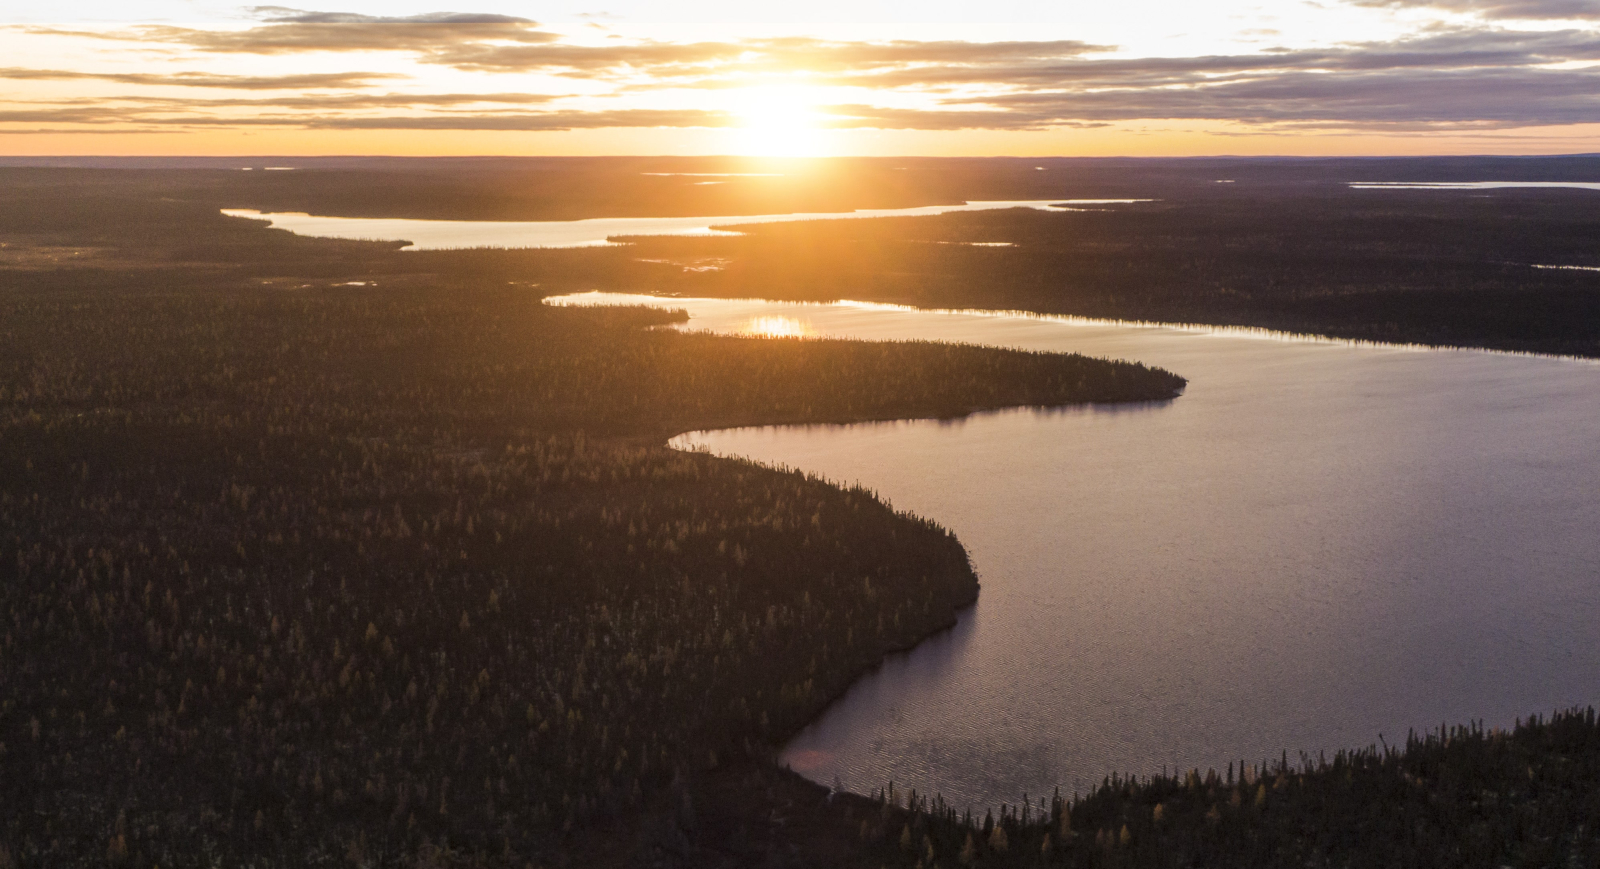 The sun sets over the Seal River Watershed in Northern Manitoba. The network of rivers is lit up by the sun.